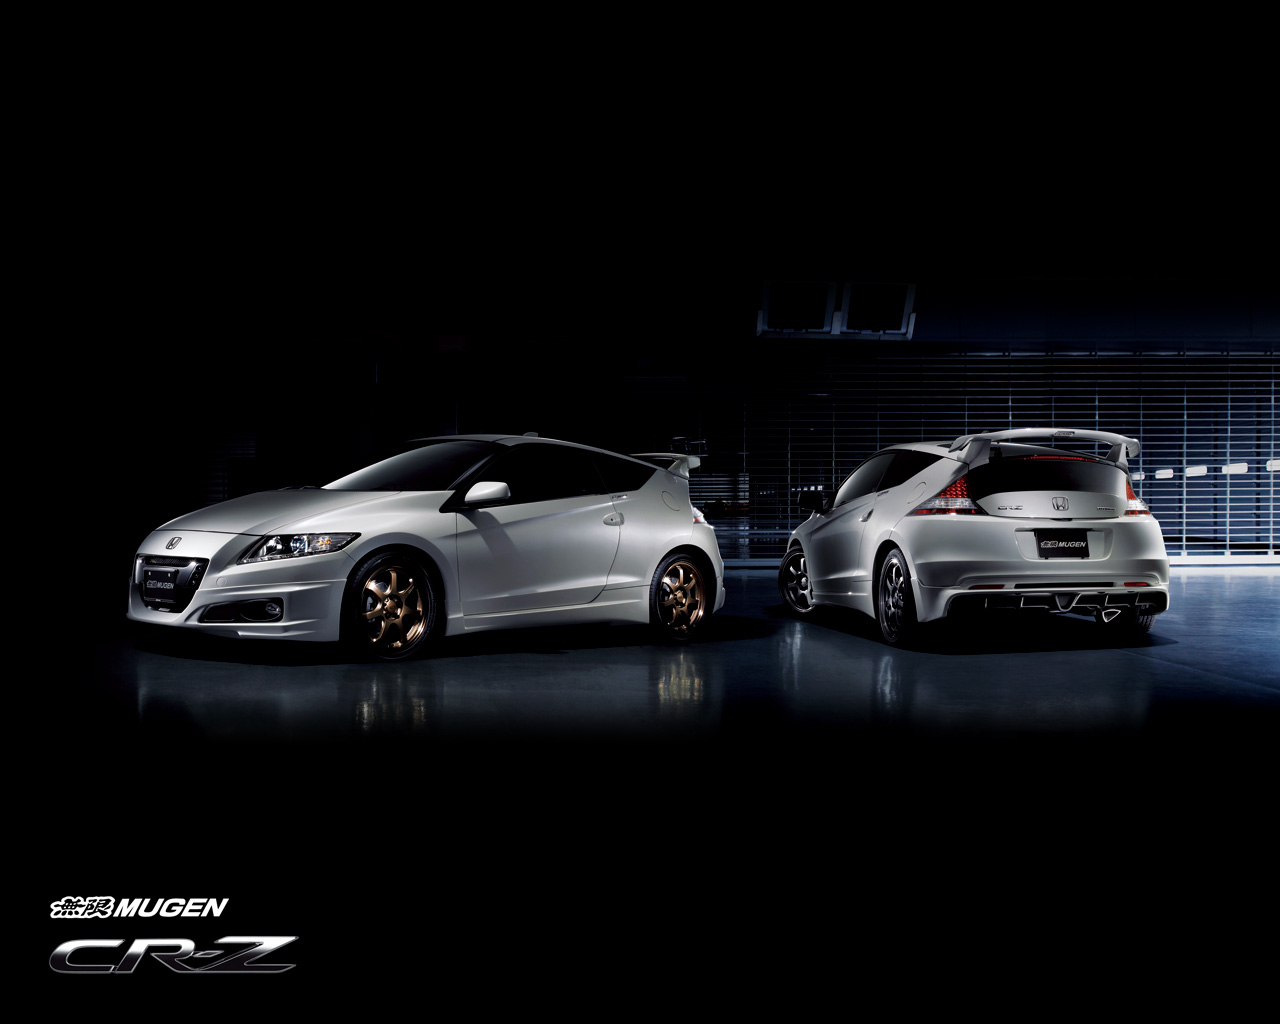 Mugen Releases Accessory Line For Honda Cr Z The Blog Of Cars Ambitious But Rubbish